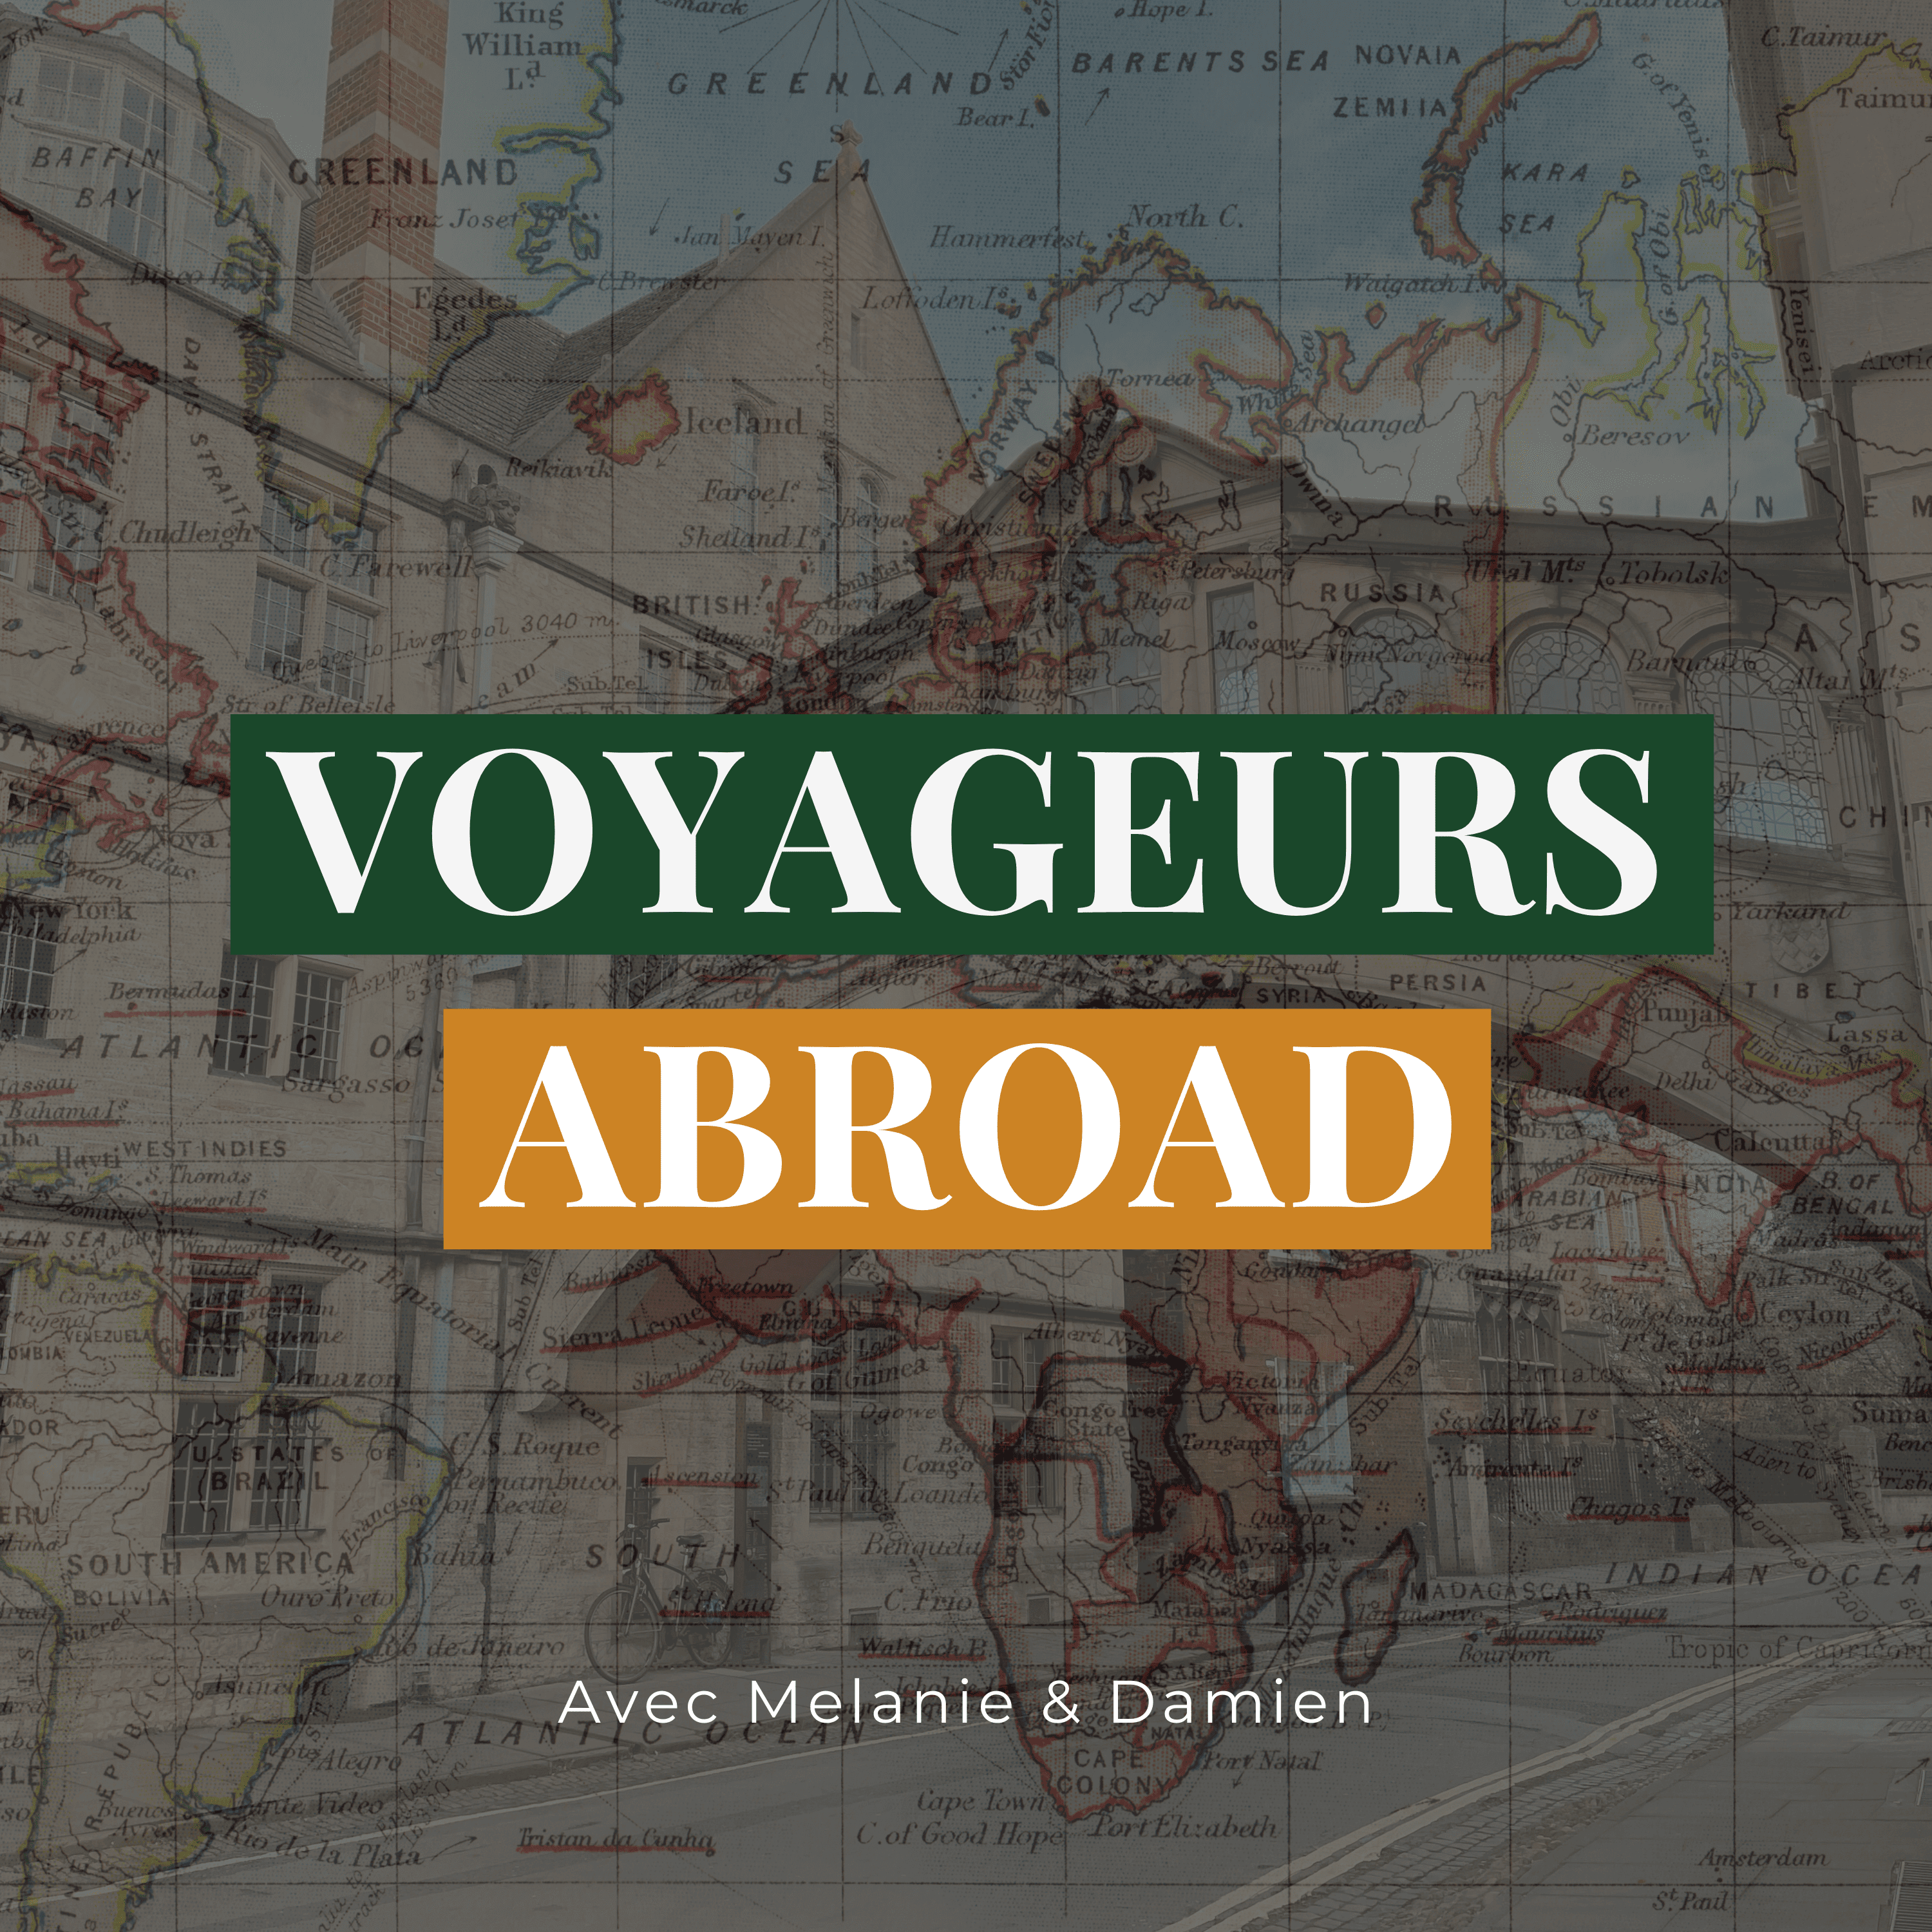 podcast voyageurs abroad